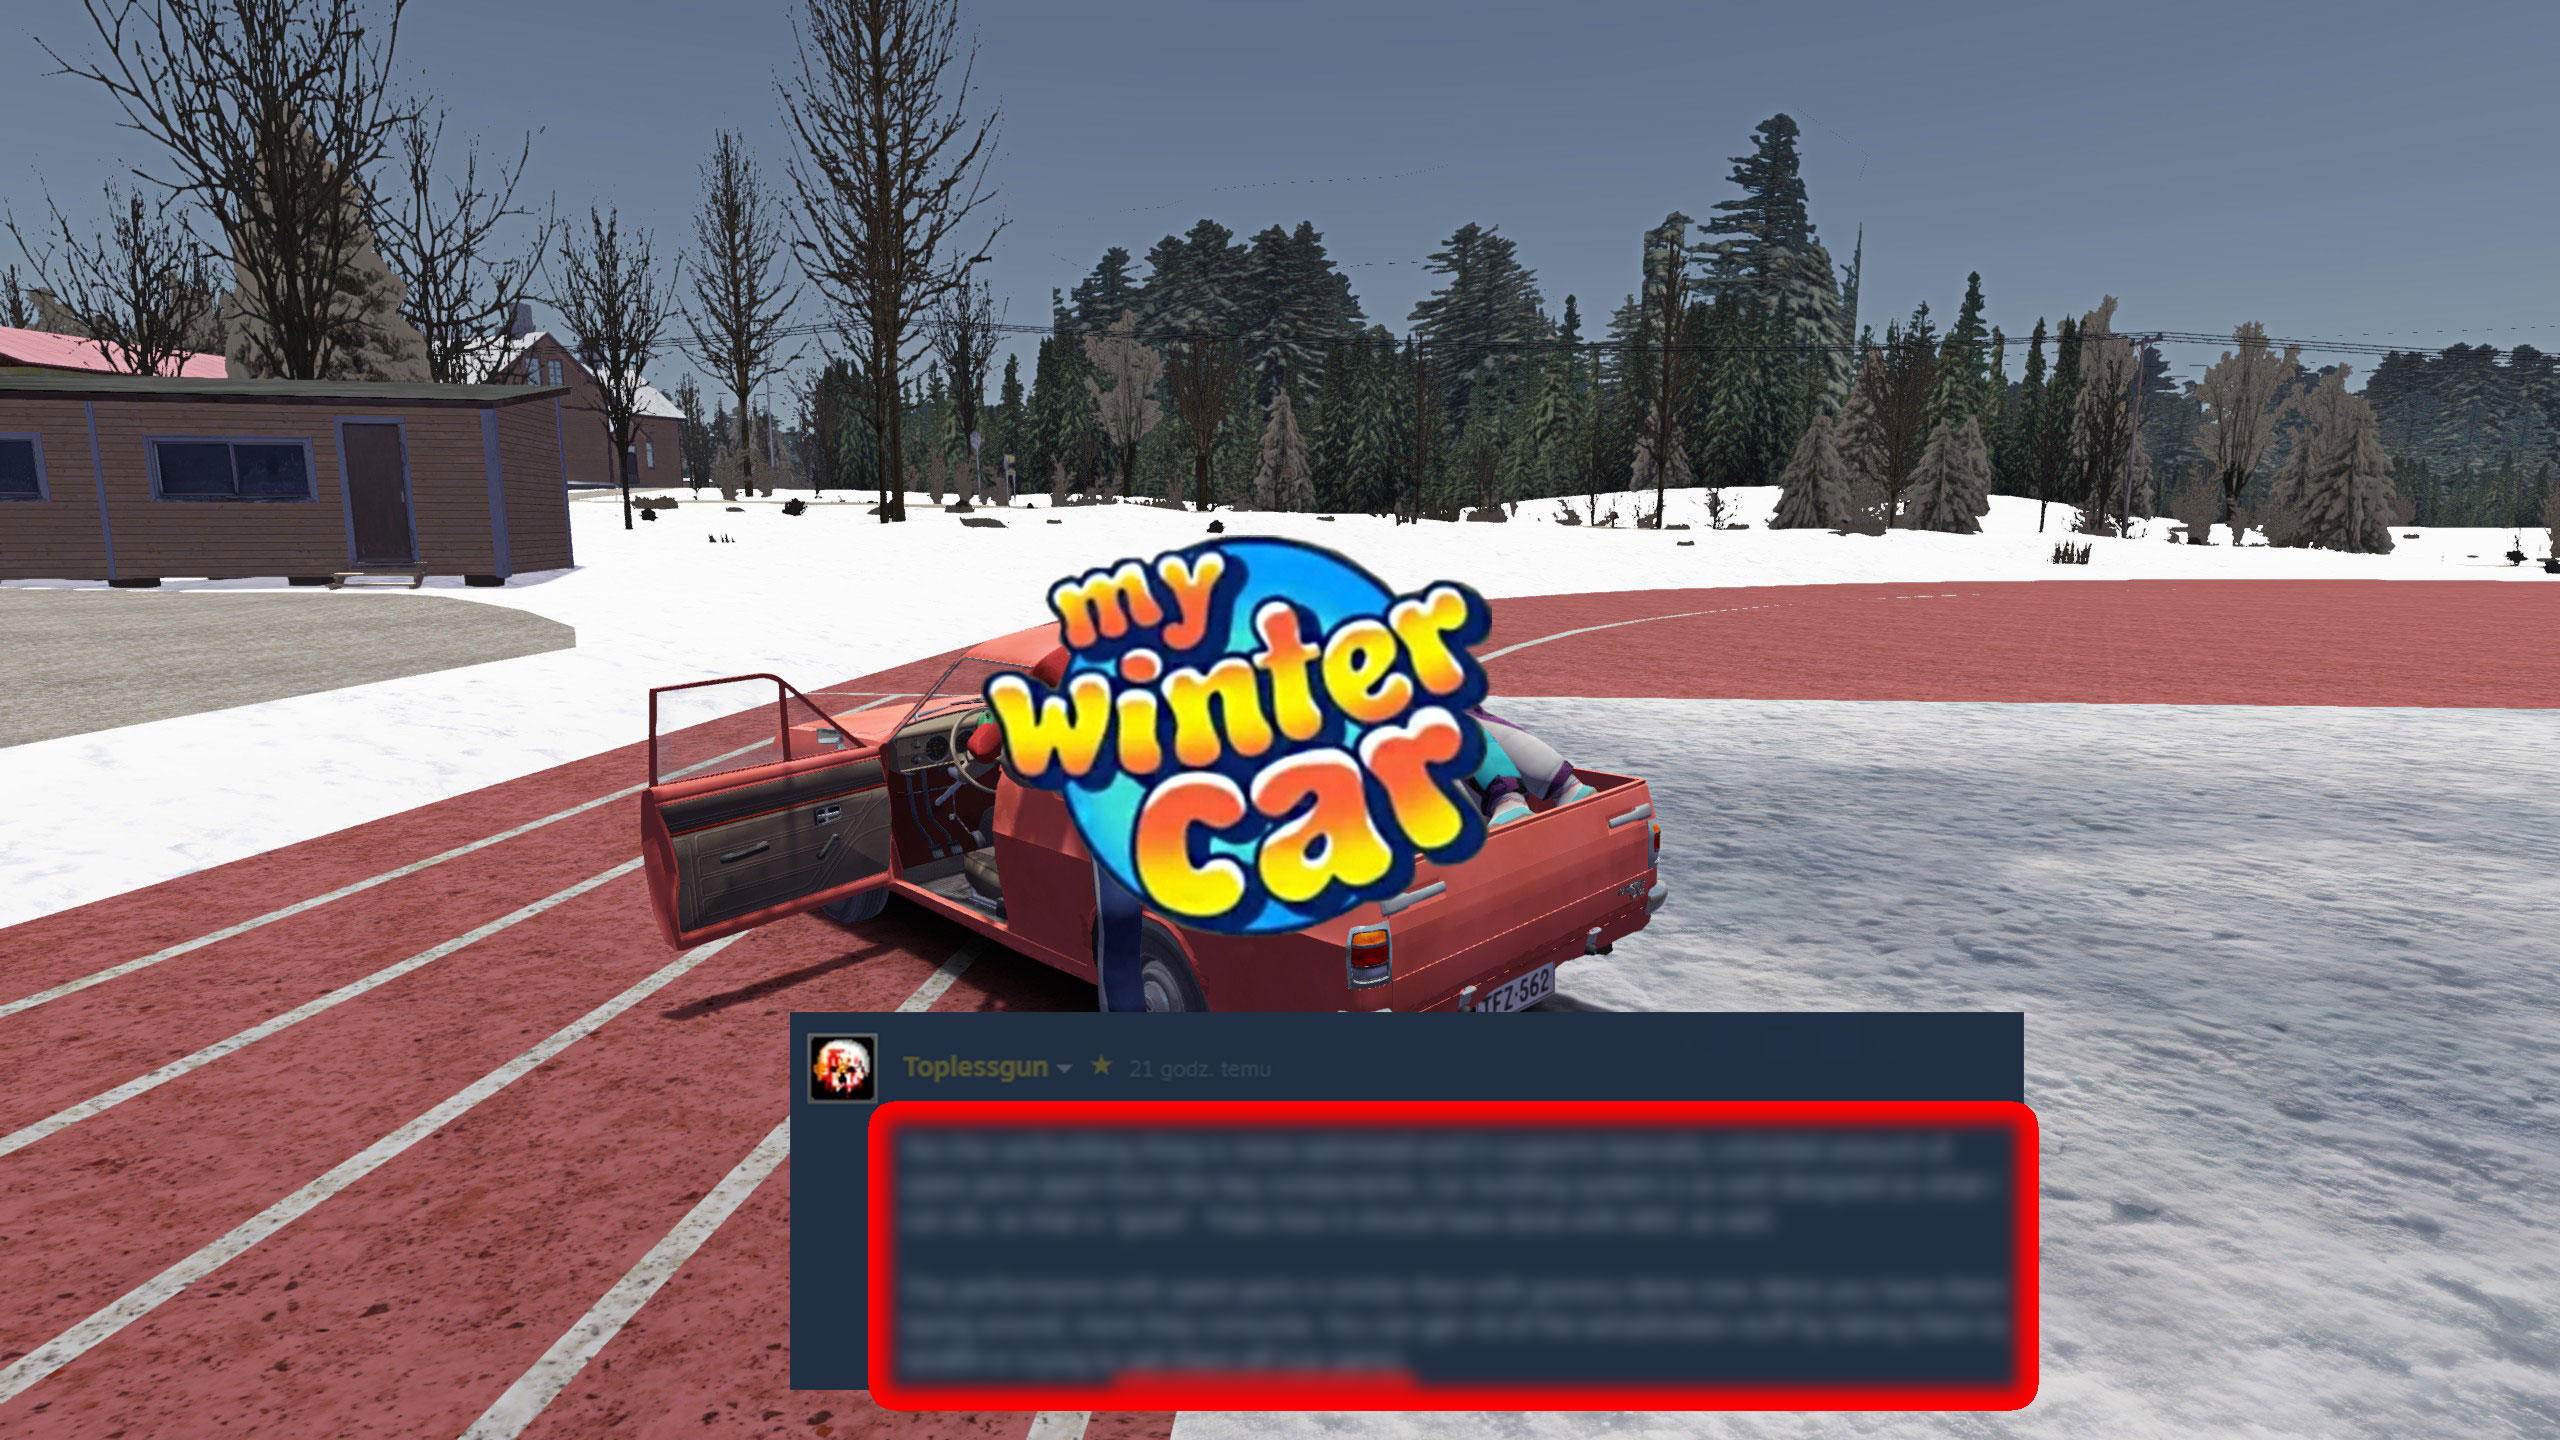 Who's excited about my winter car? #mysummercar #msc #sequel #mywinter